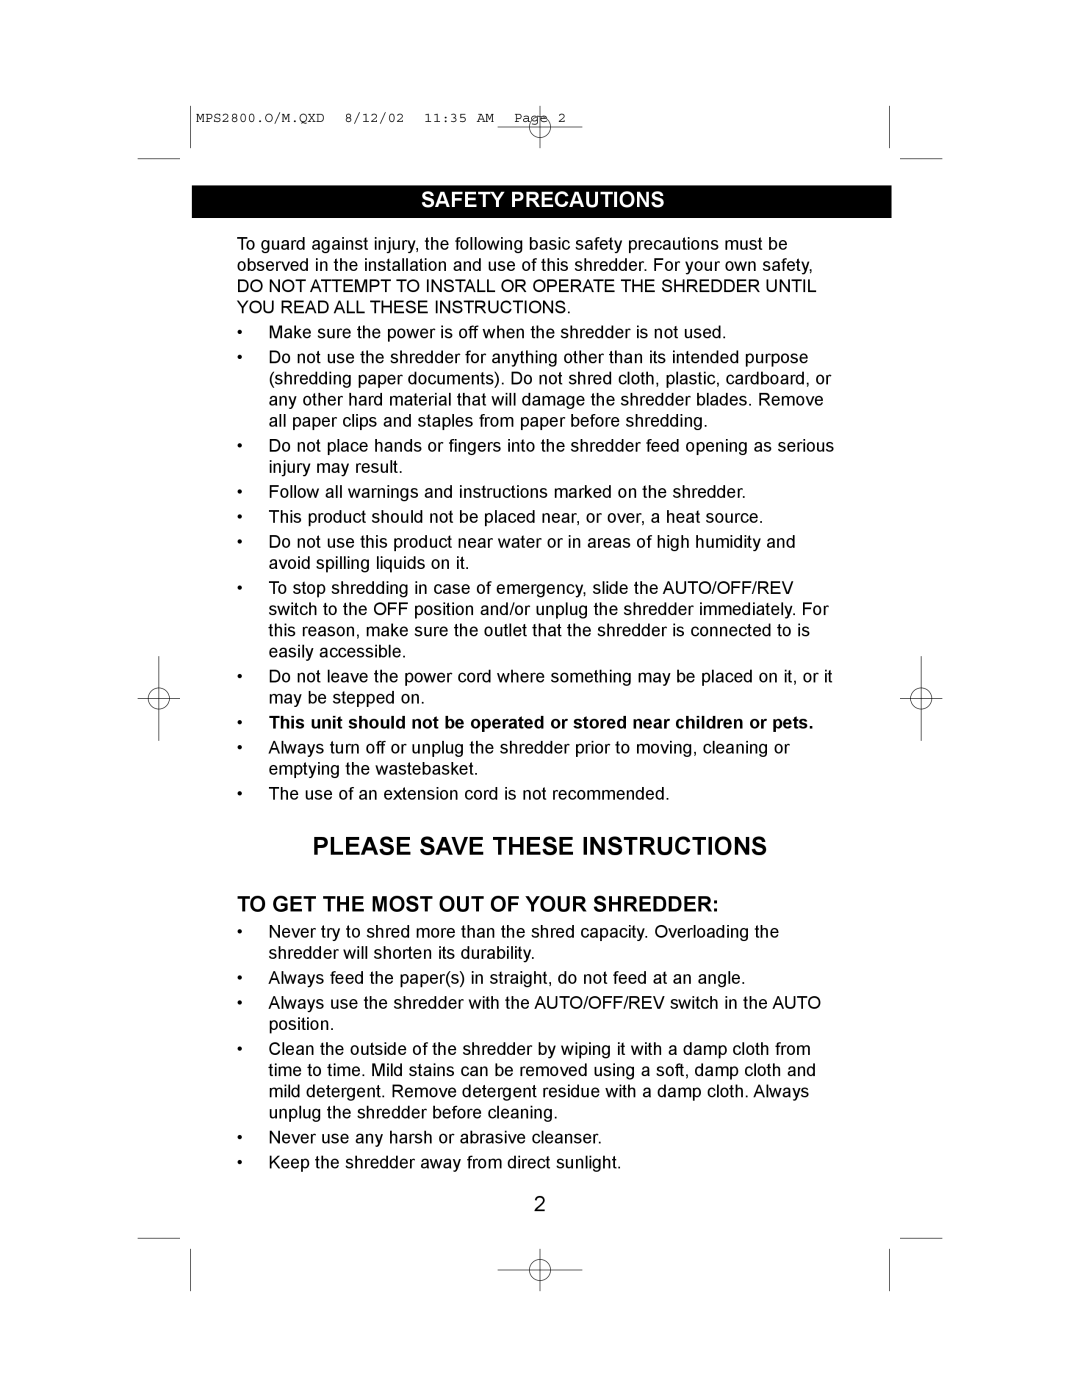 Memorex MPS2800 manual Please Save These Instructions, Safety Precautions, To Get The Most Out Of Your Shredder 